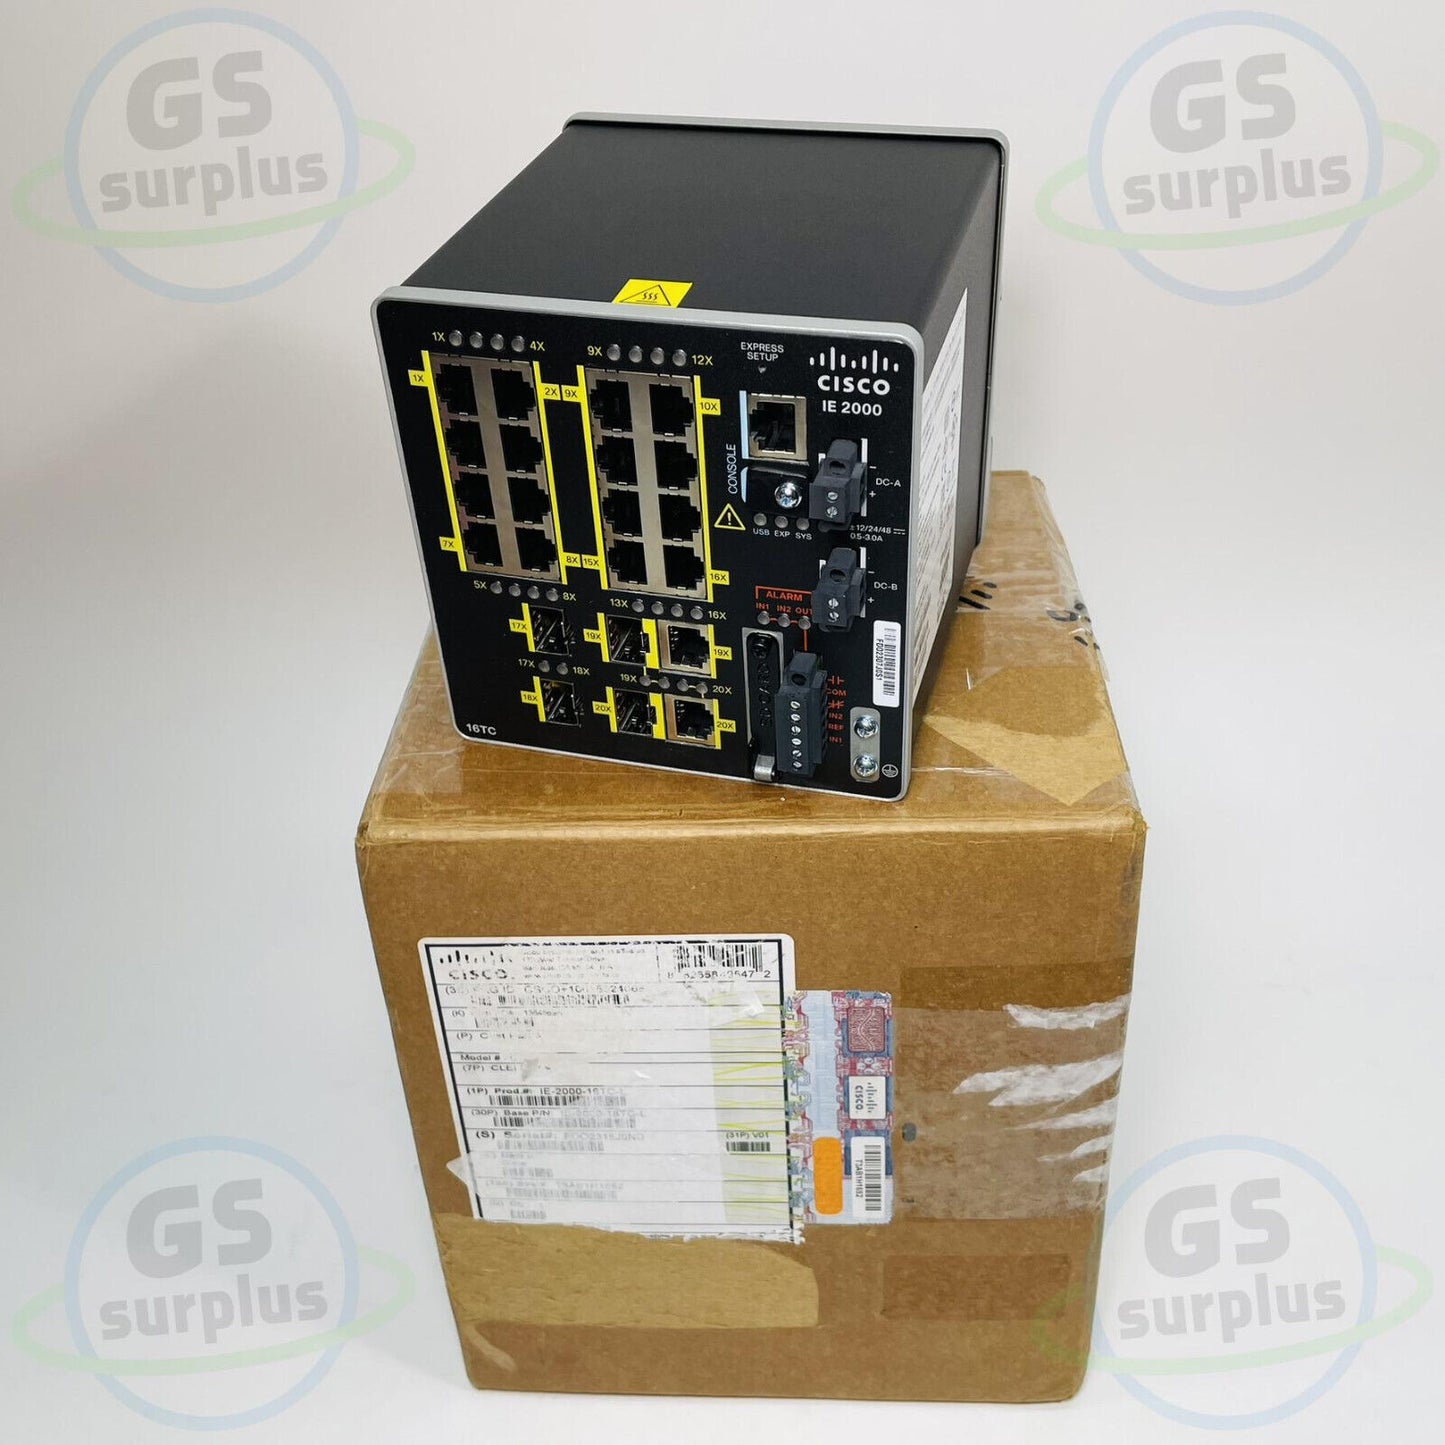 New Cisco IE-2000-16TC-L Industrial Network Switch